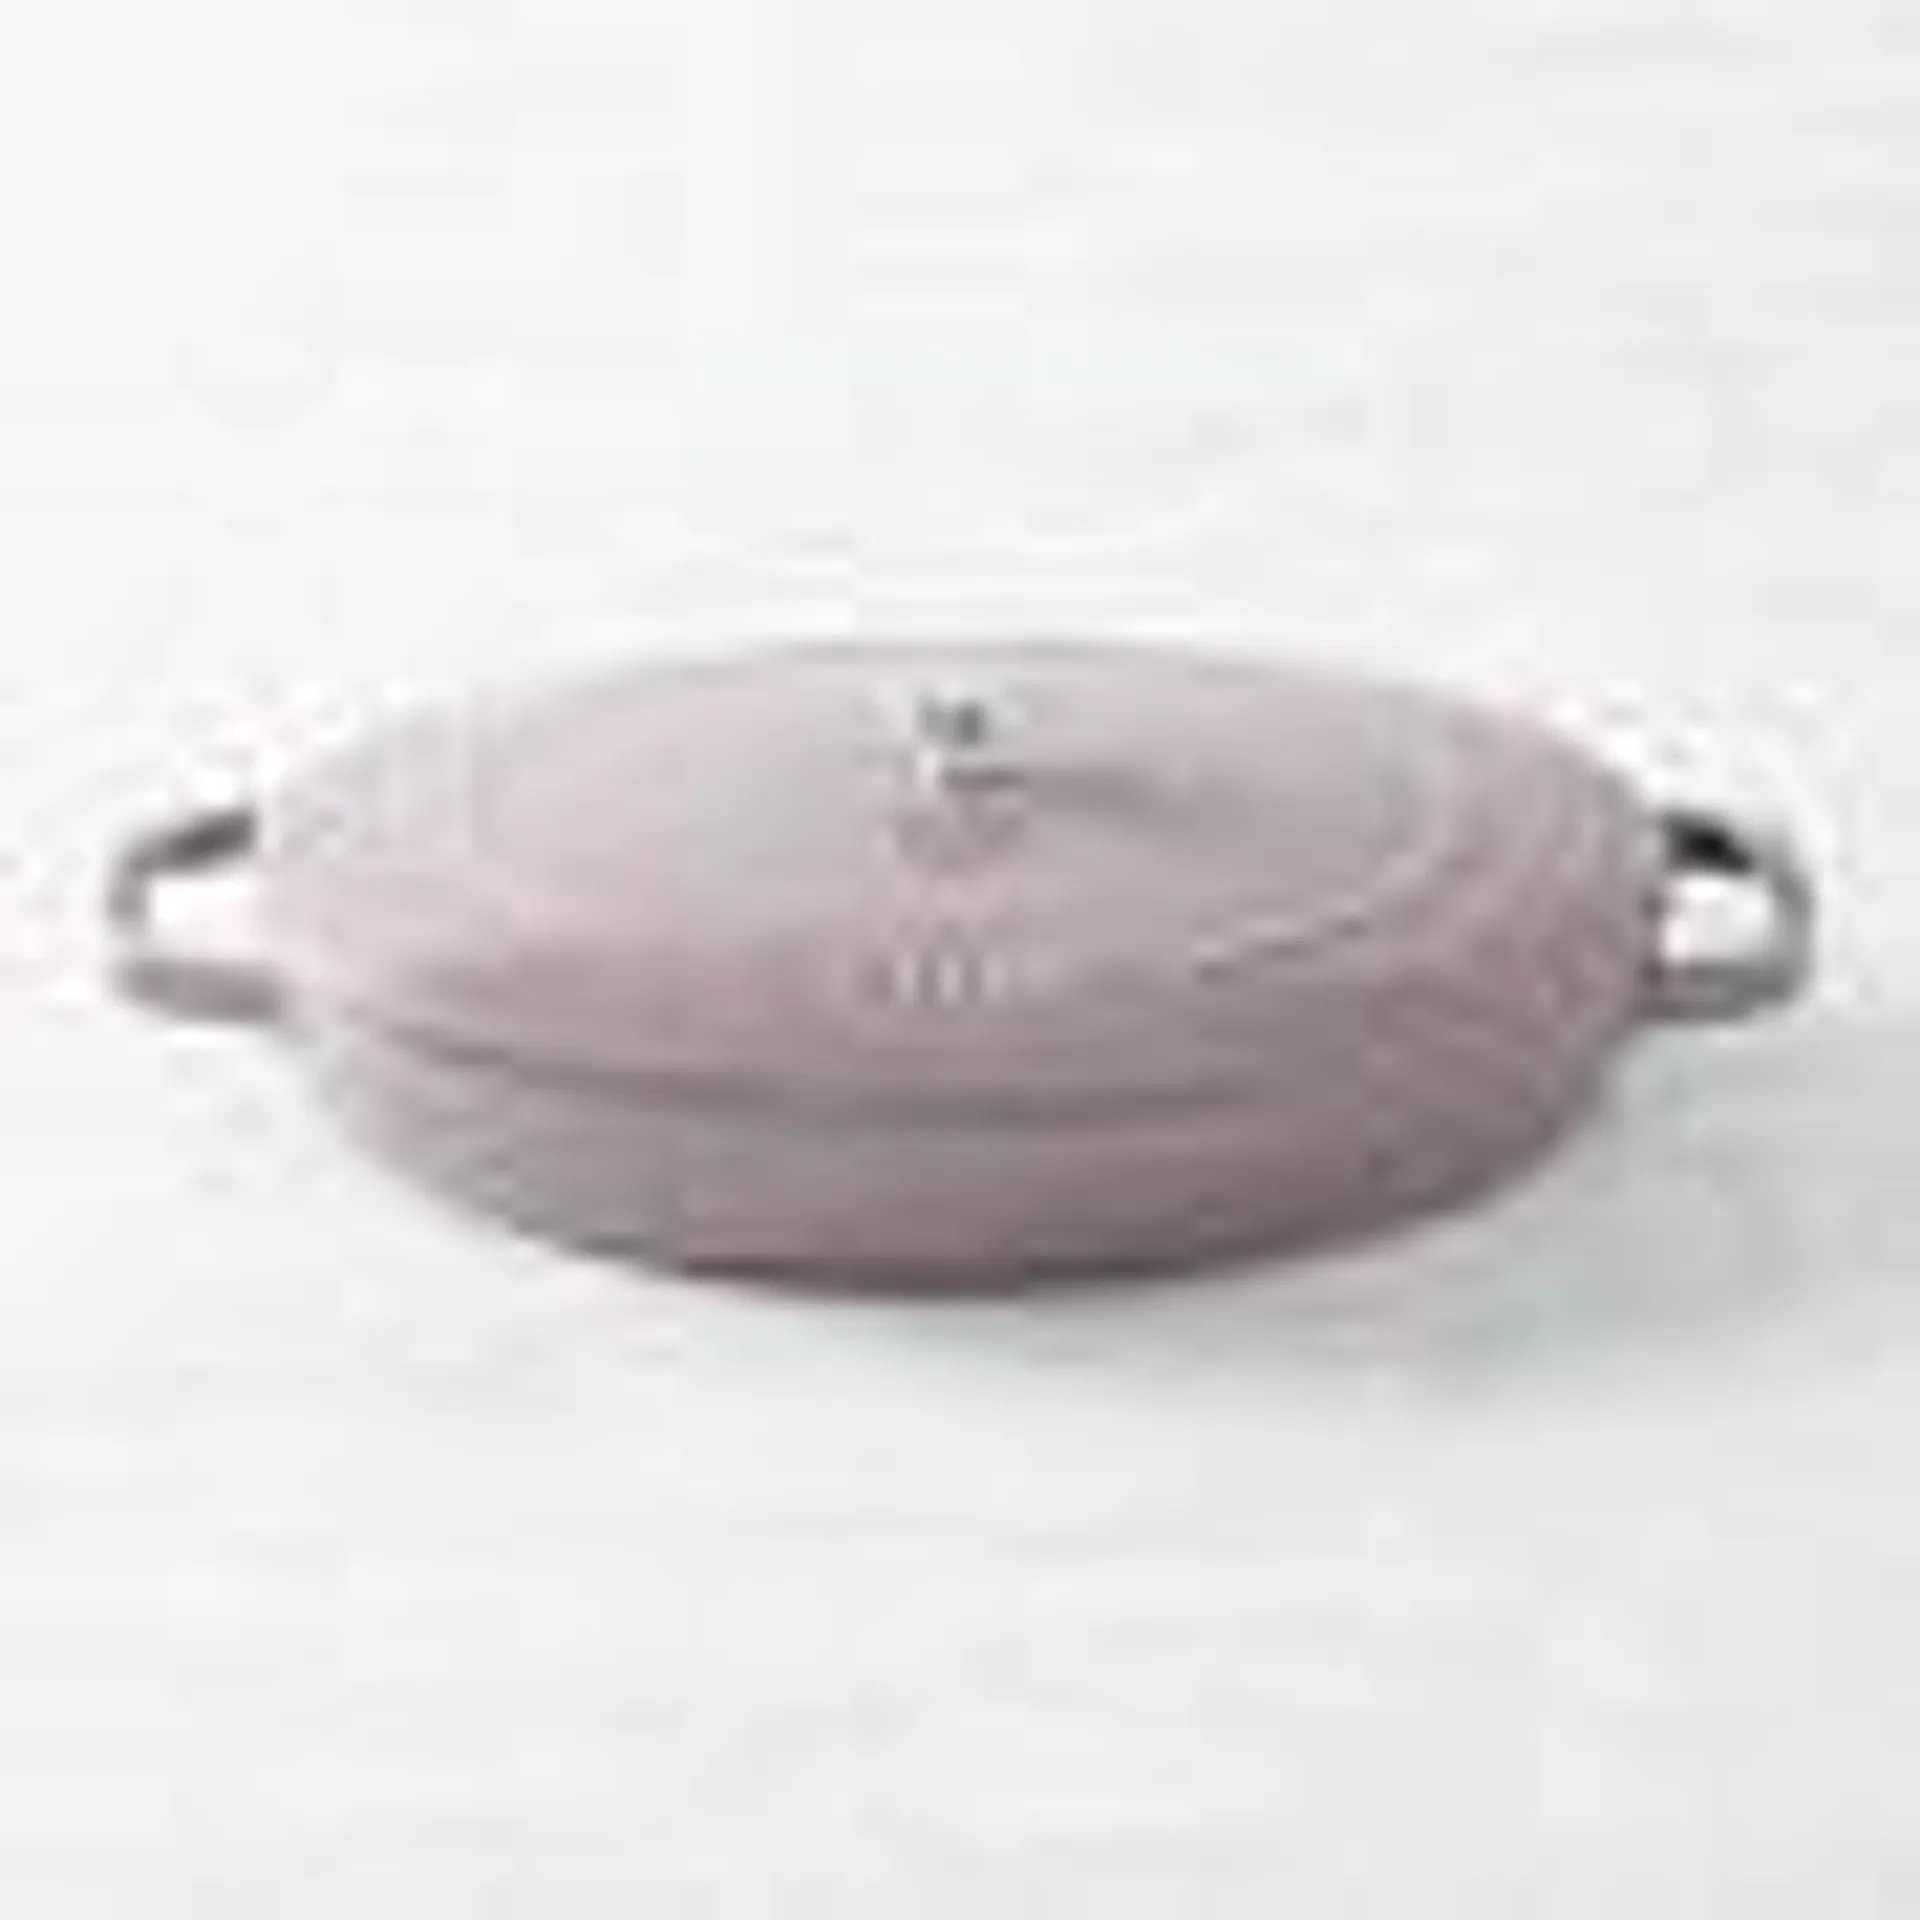 Staub Enameled Cast Iron Oval Gratin with Lid